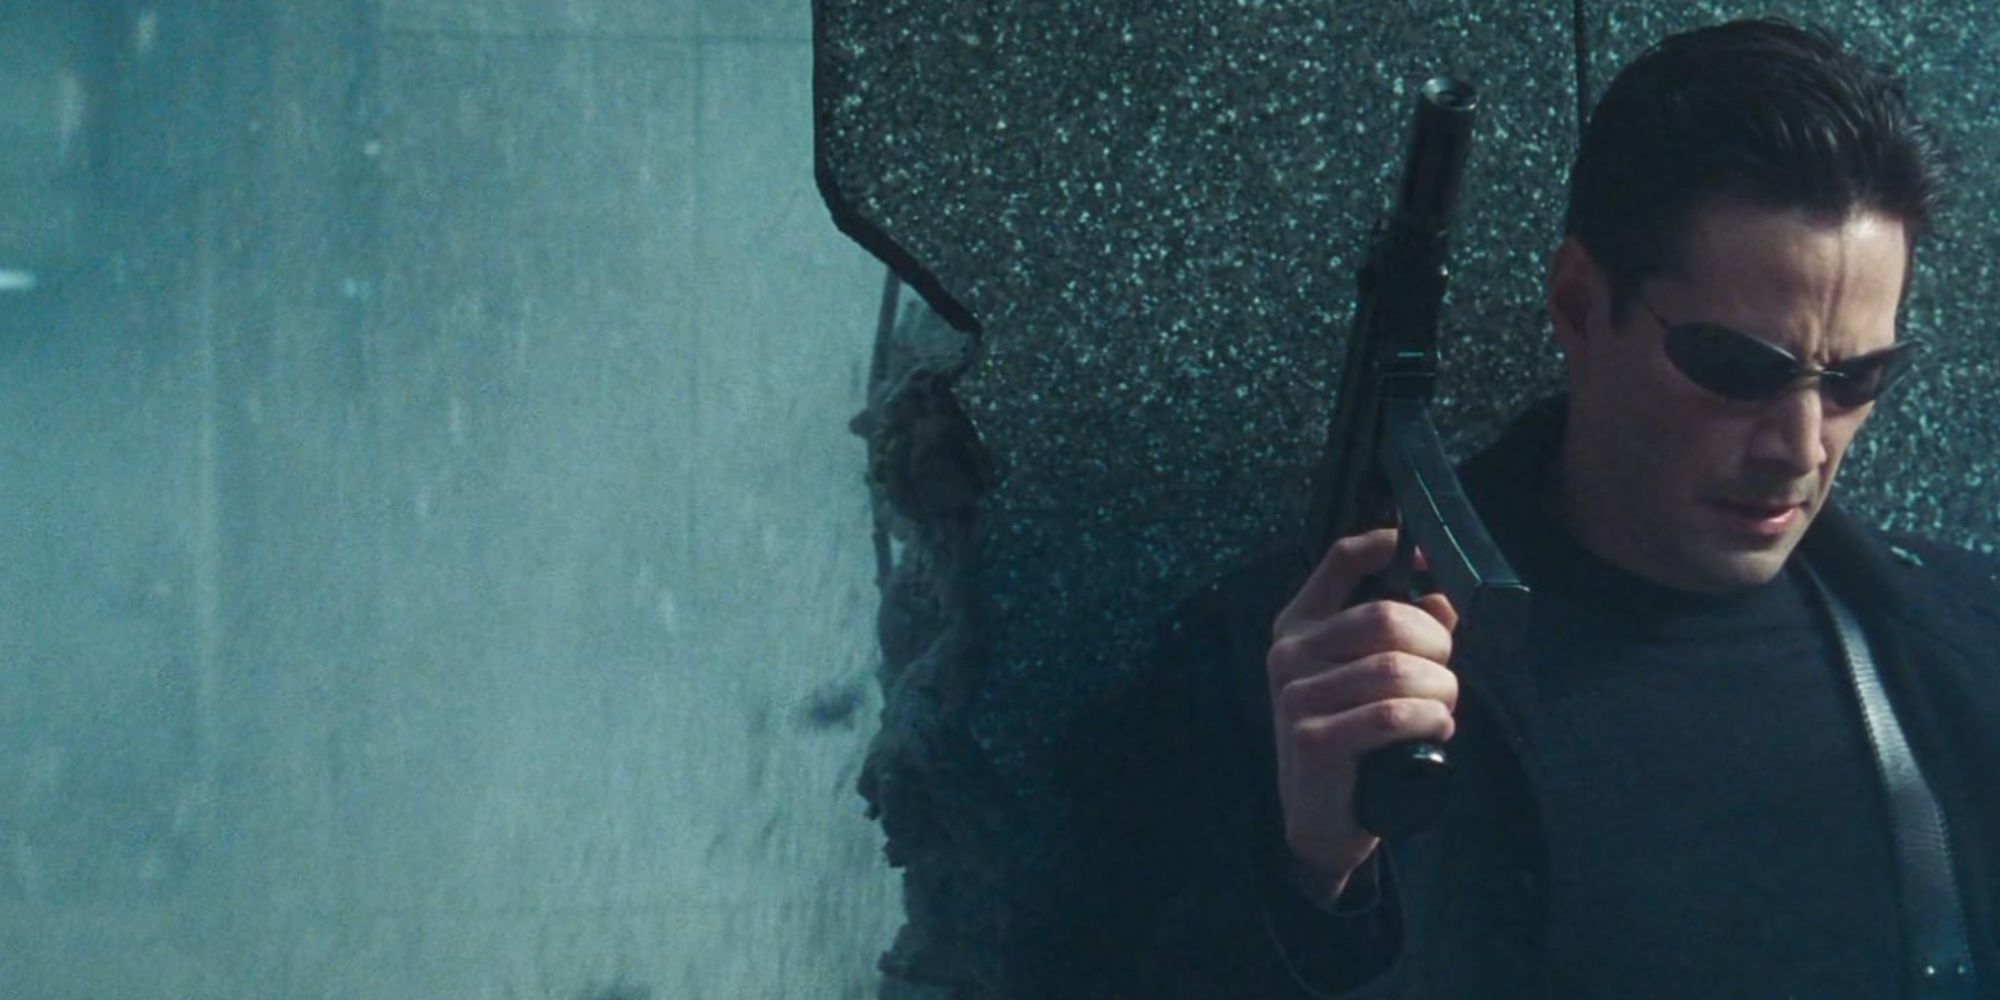 Keanu Reeves as Neo taking cover behind a wall that's coming apart from all the gunfire.